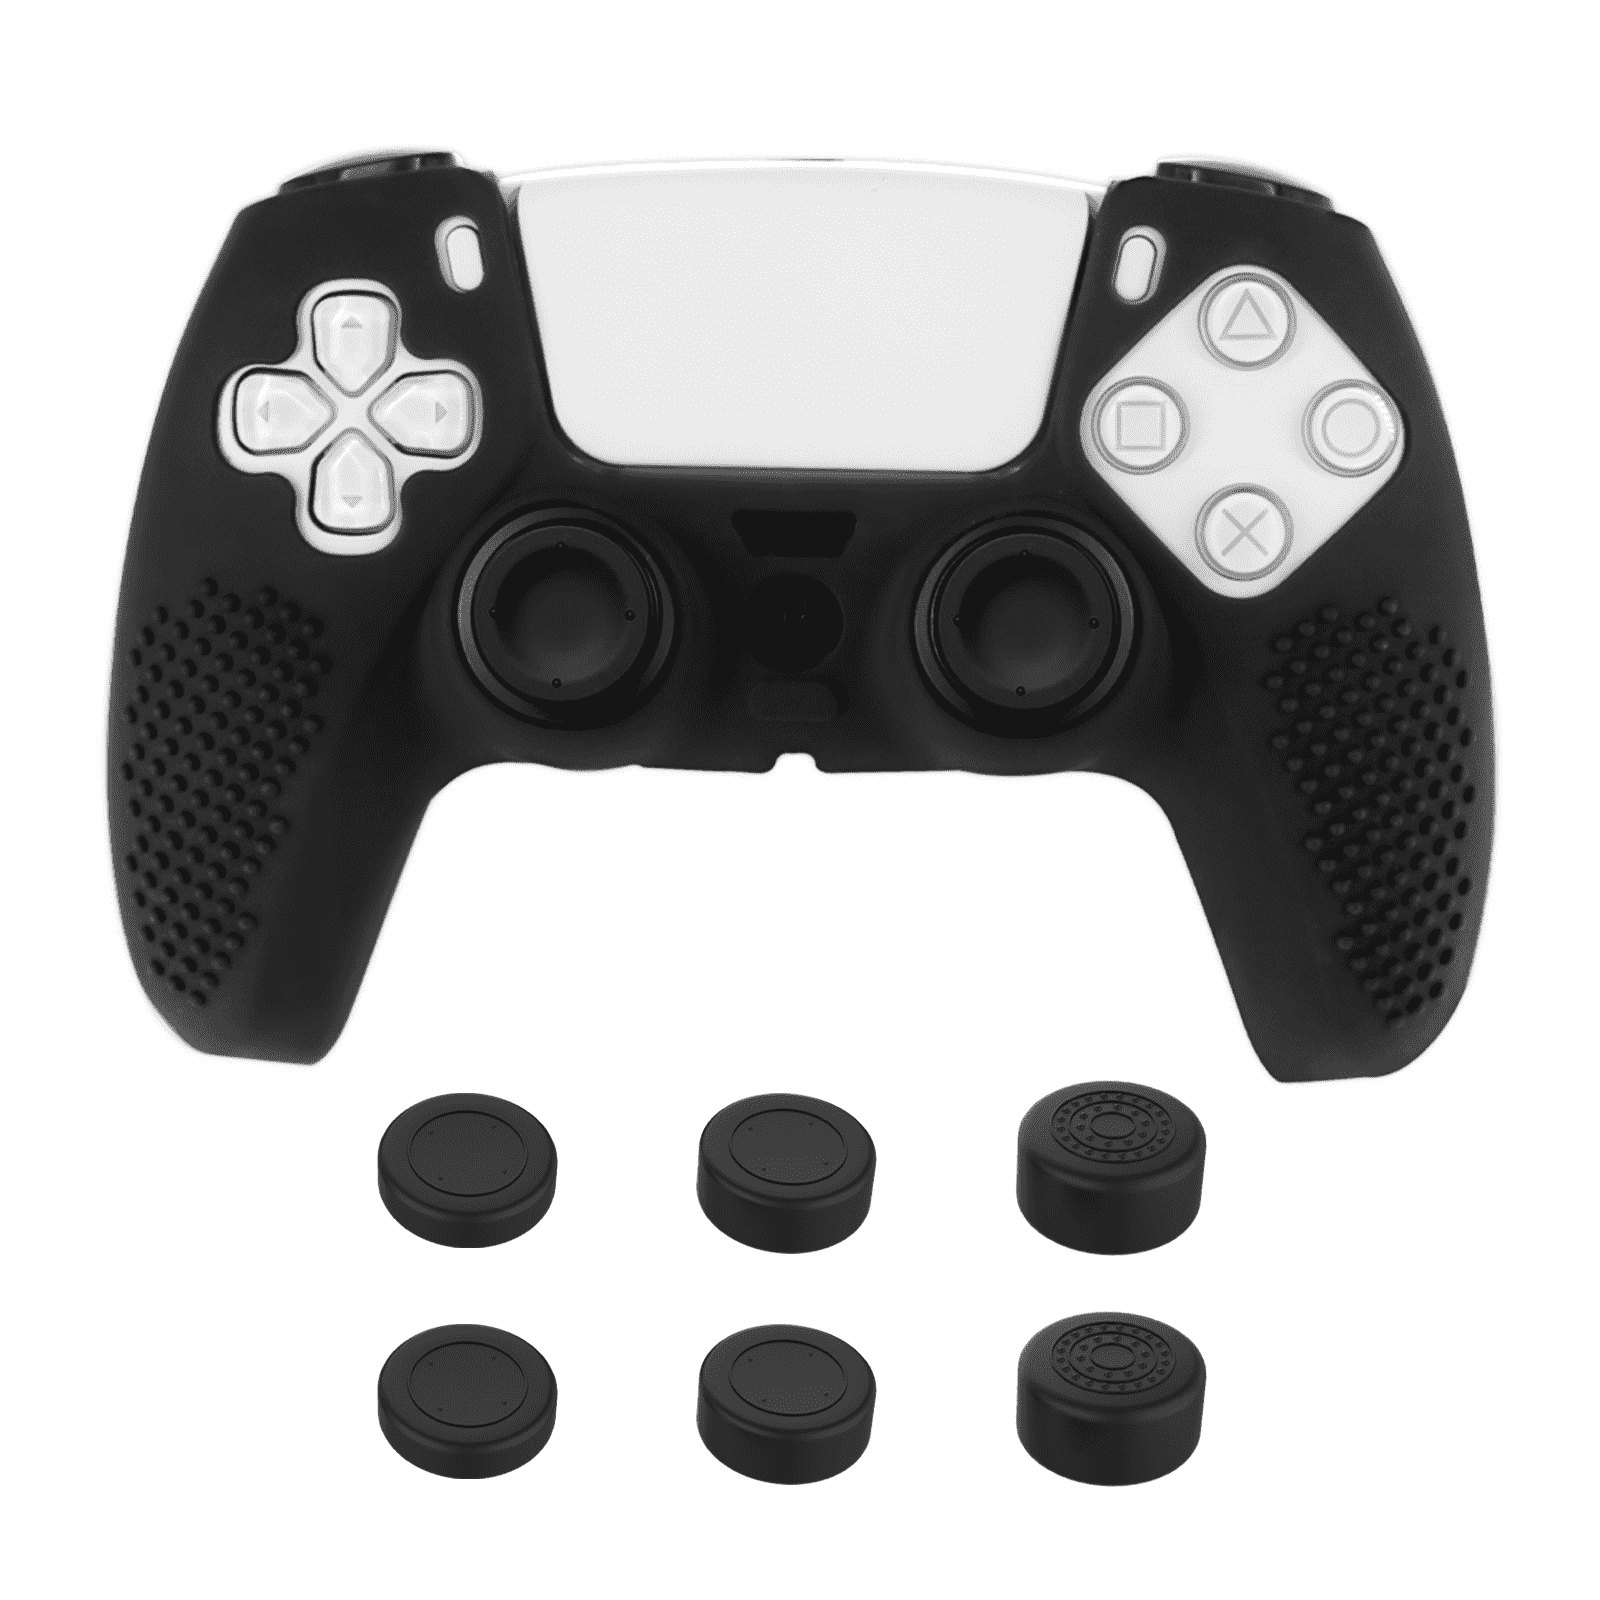 Black controller protector case cover with 6 analog thumb grips cover